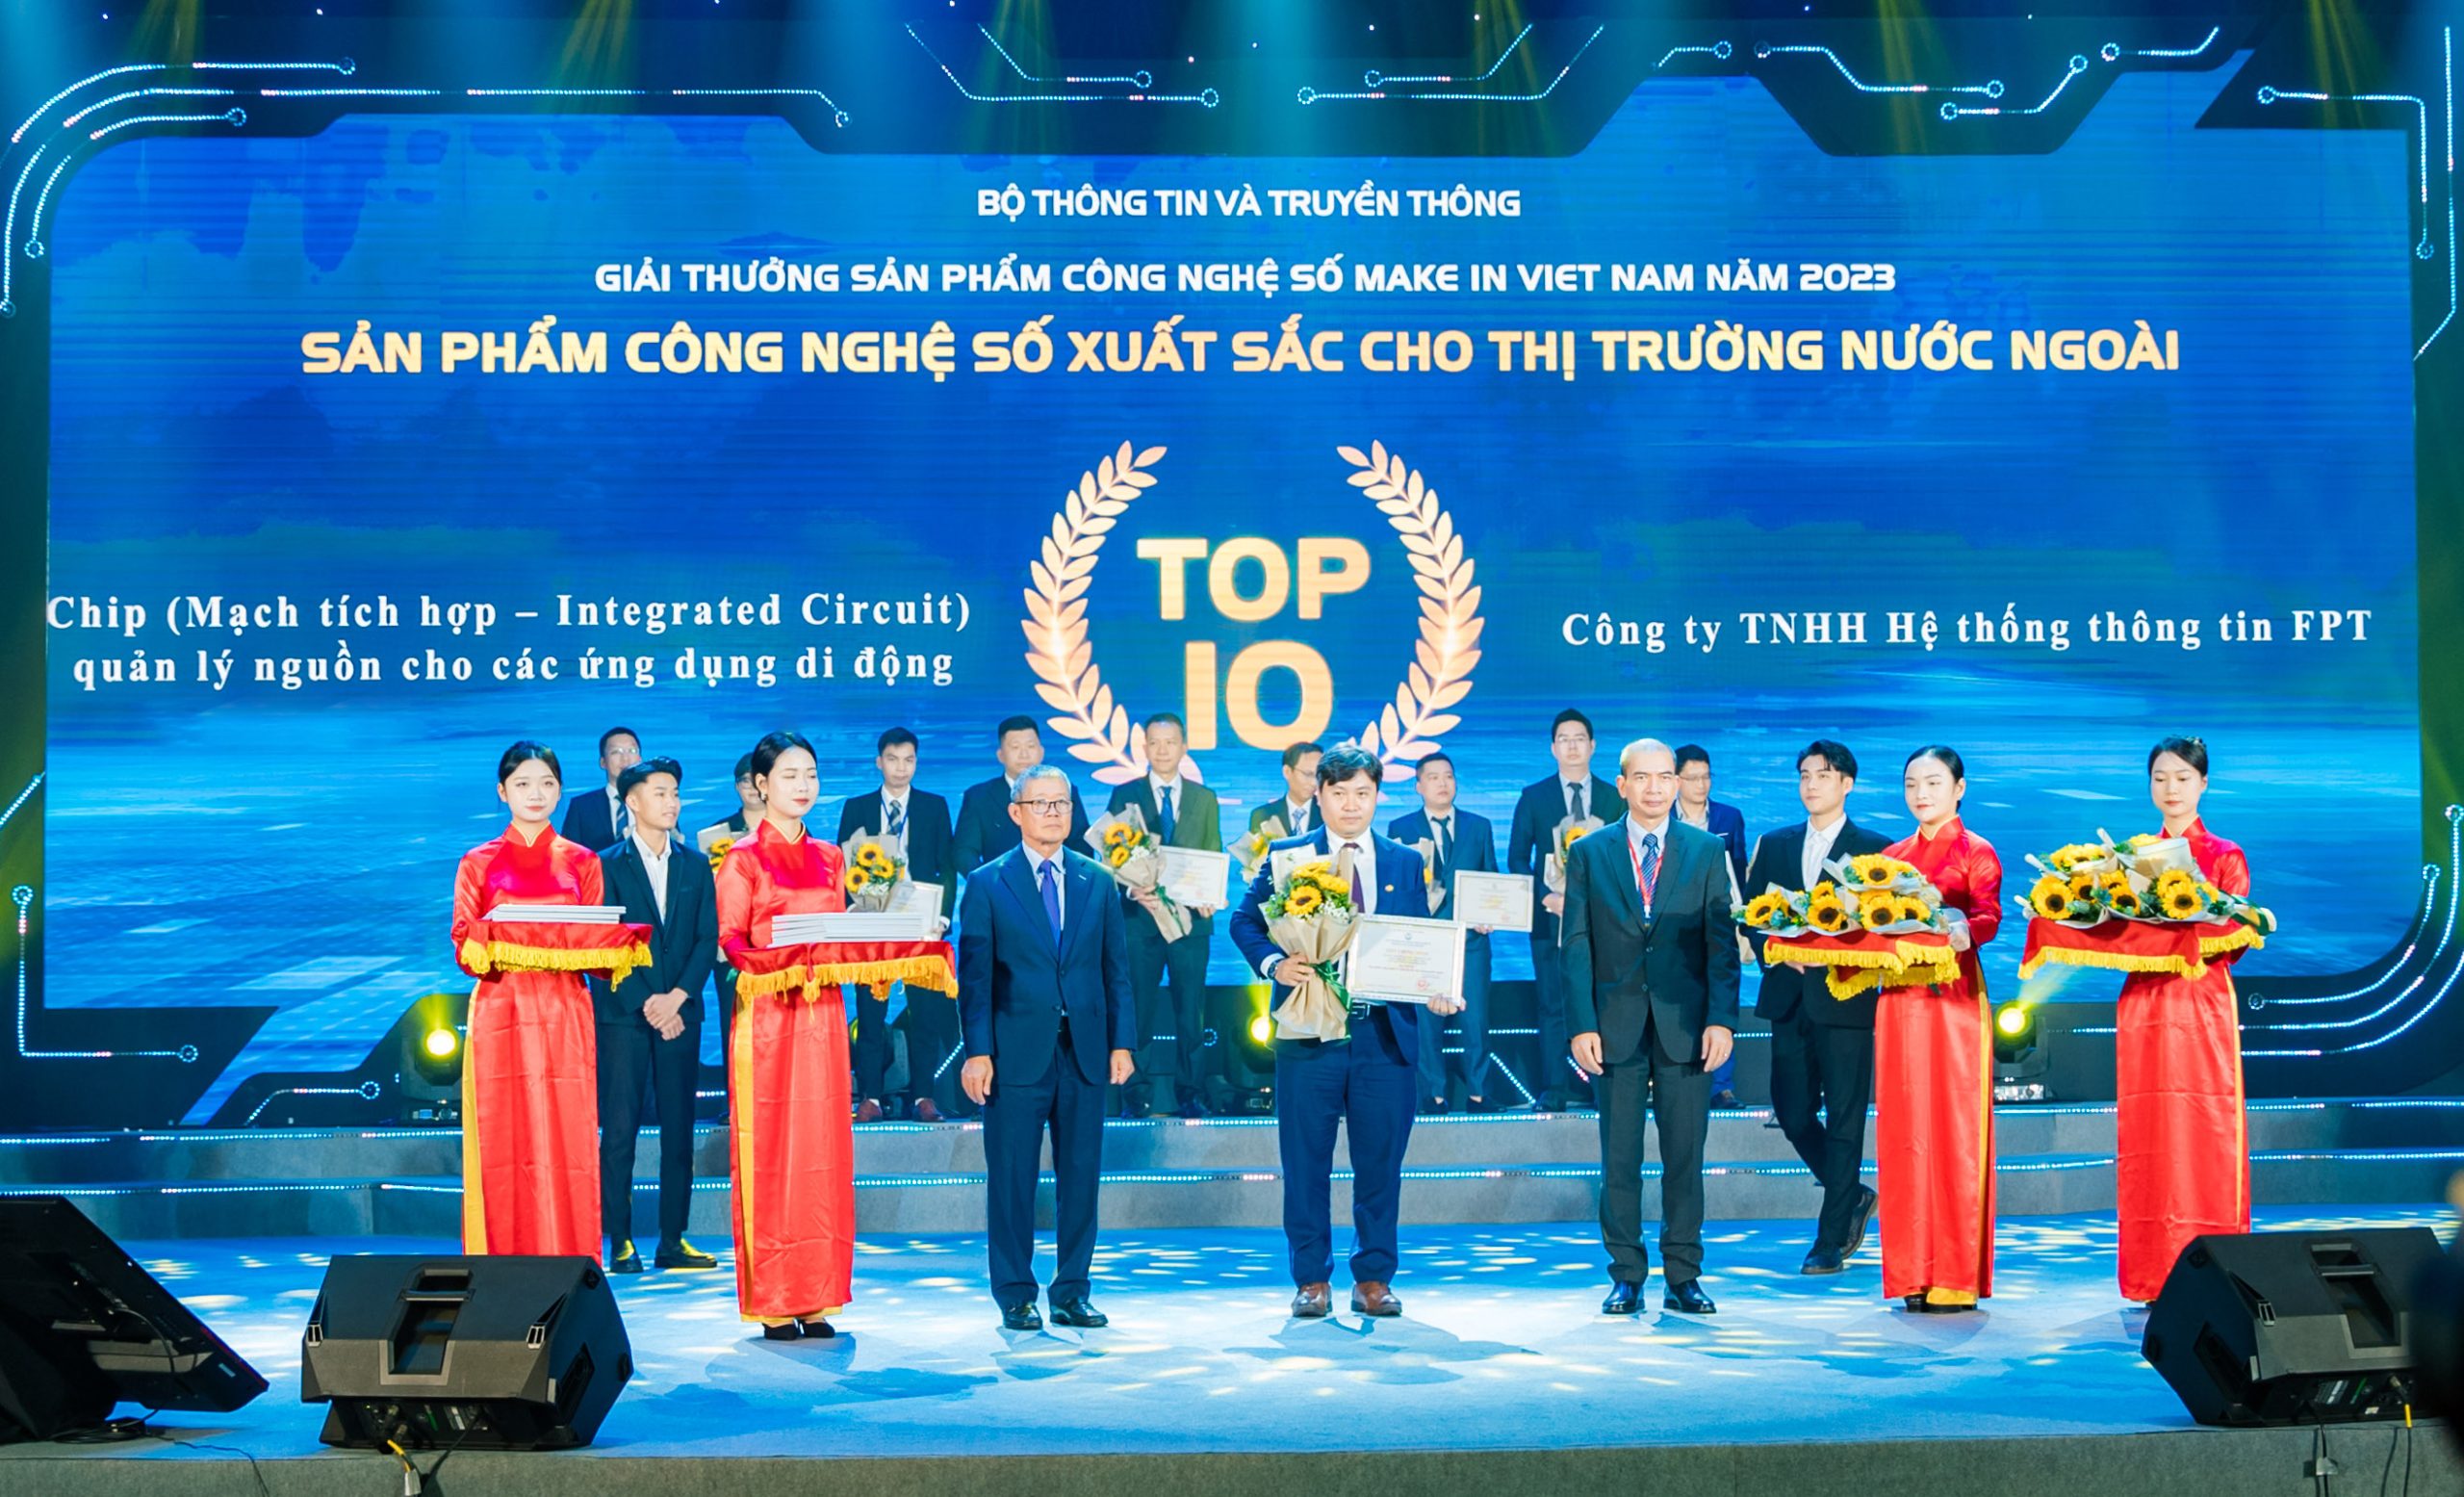 2023 Make in Viet Nam Digital Technology Product Awards – Top 10  Excellent Digital Technology Products for Overseas Markets category – Power Management Integrated Circuits for Mobile Applications